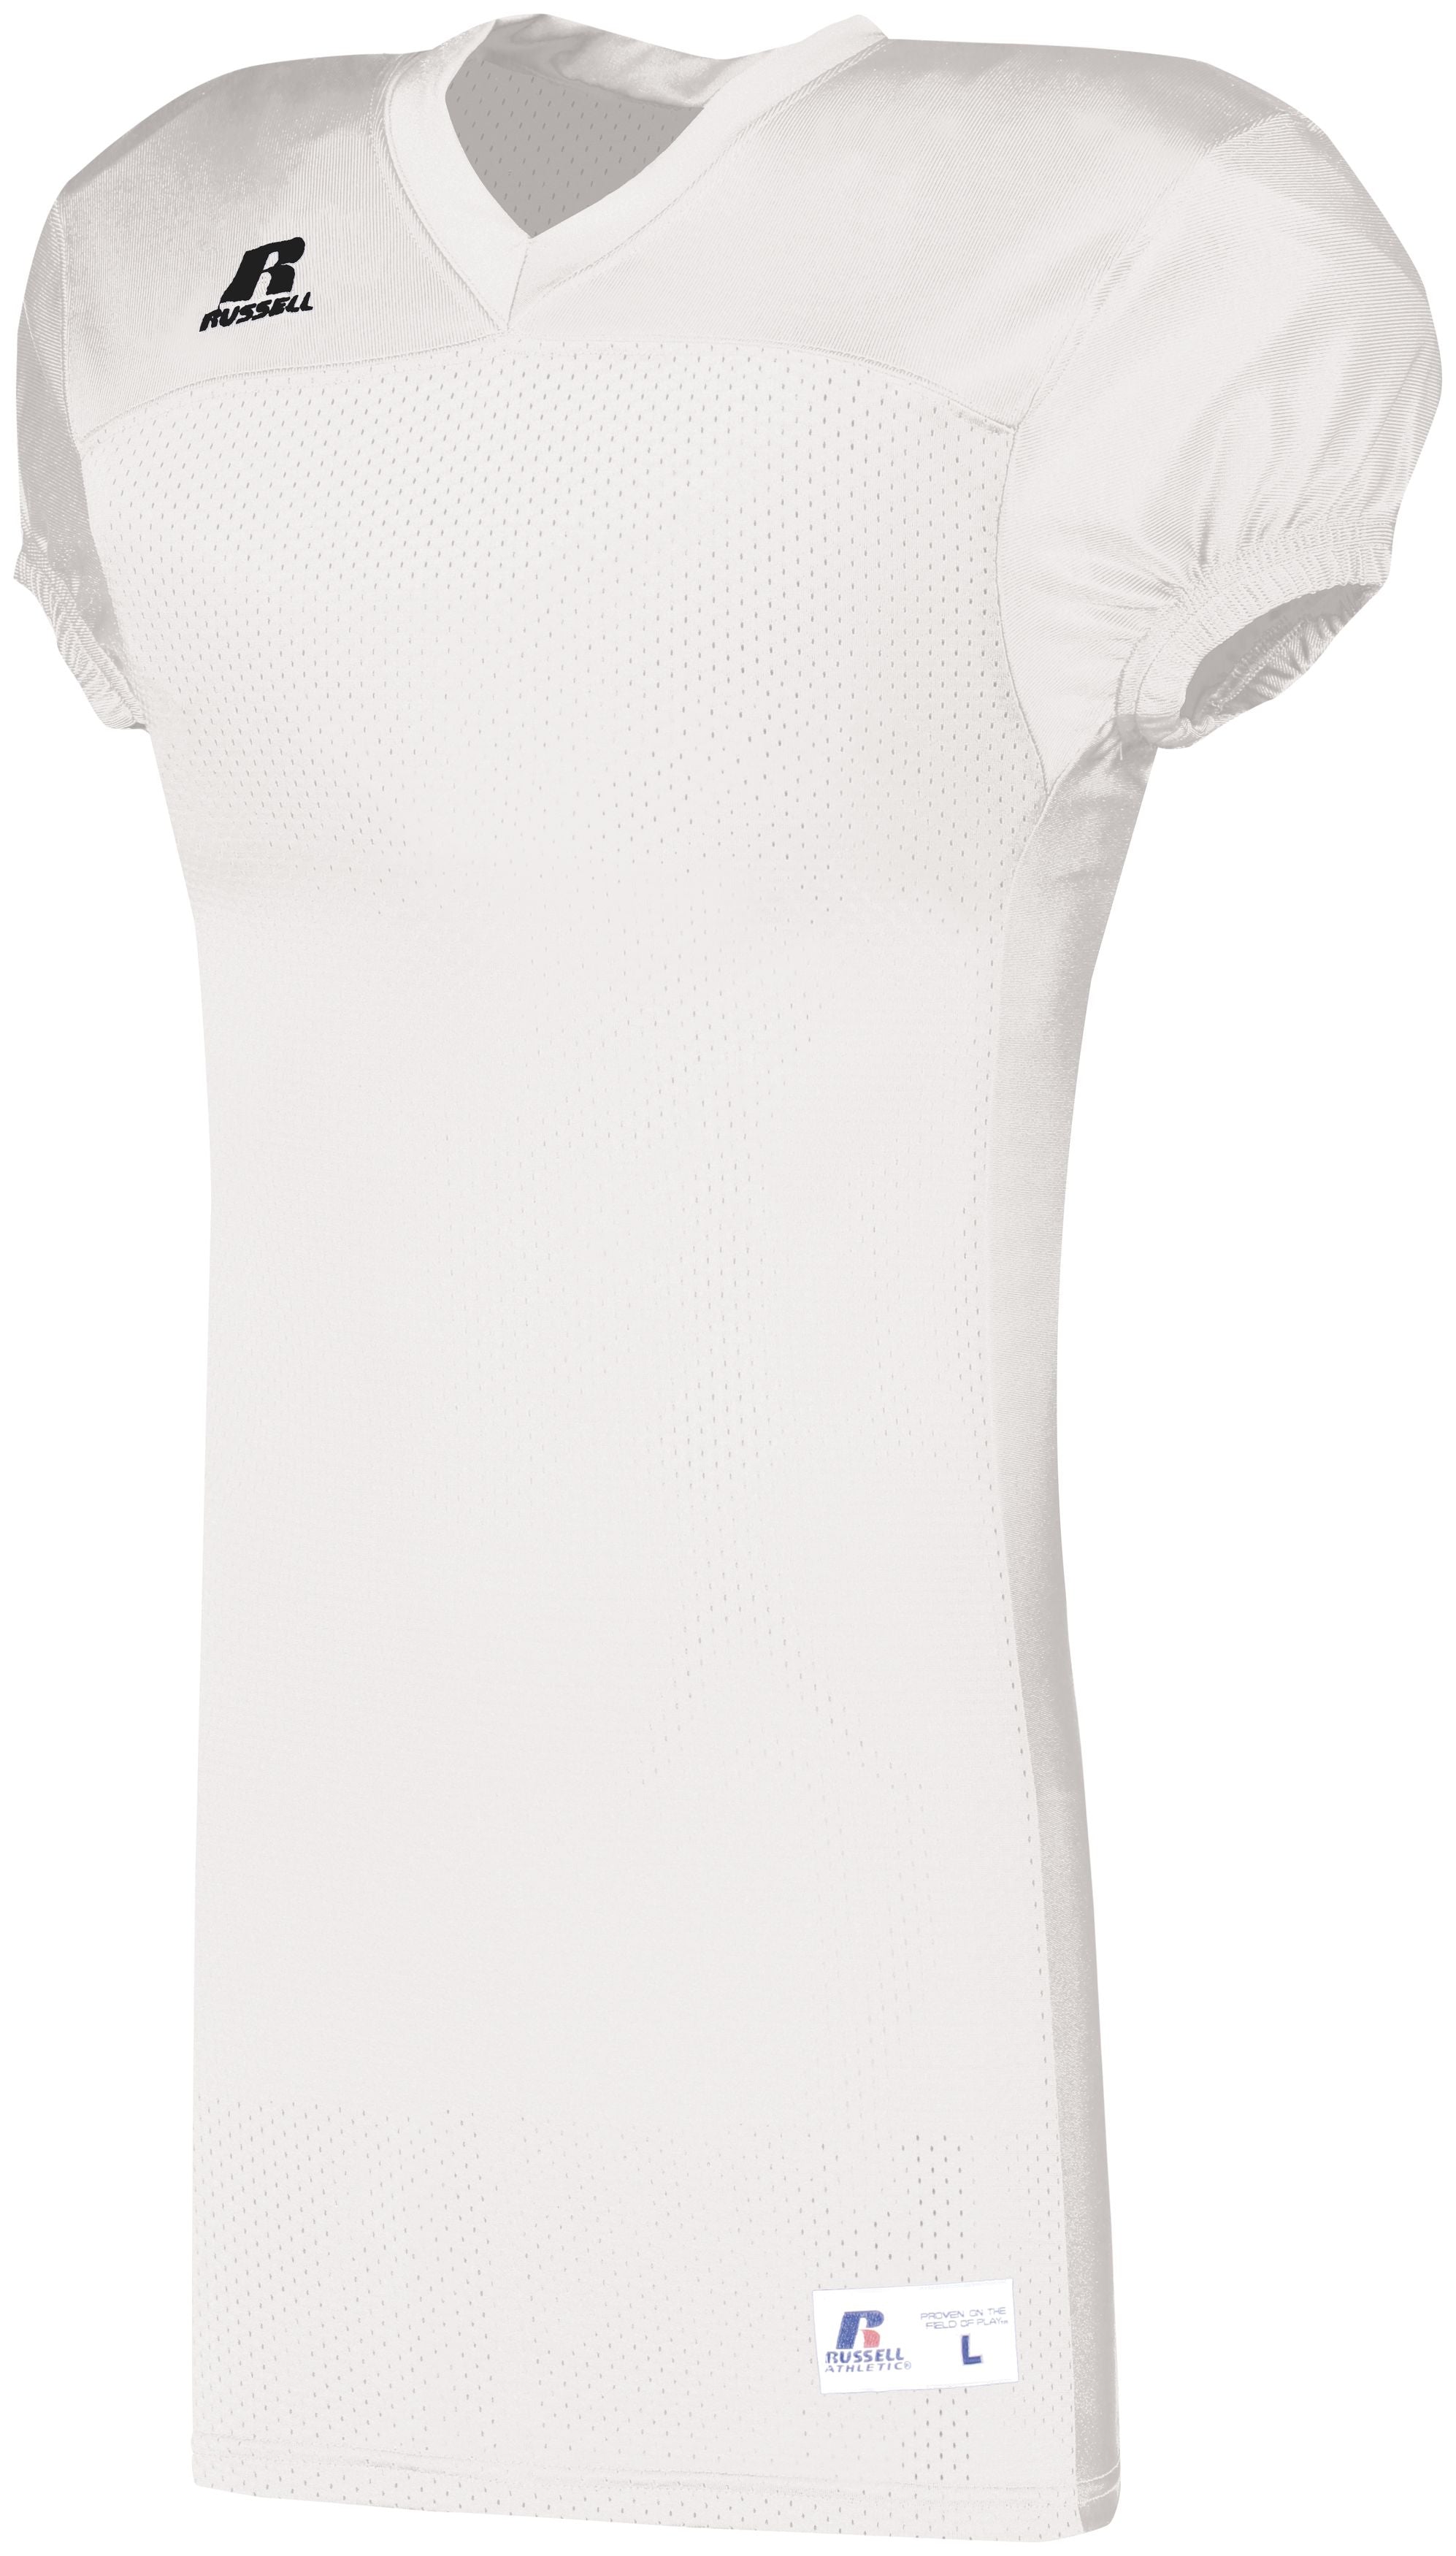 Russell Athletic Youth Solid Jersey With Side Inserts in White  -Part of the Youth, Youth-Jersey, Football, Russell-Athletic-Products, Shirts, All-Sports, All-Sports-1 product lines at KanaleyCreations.com